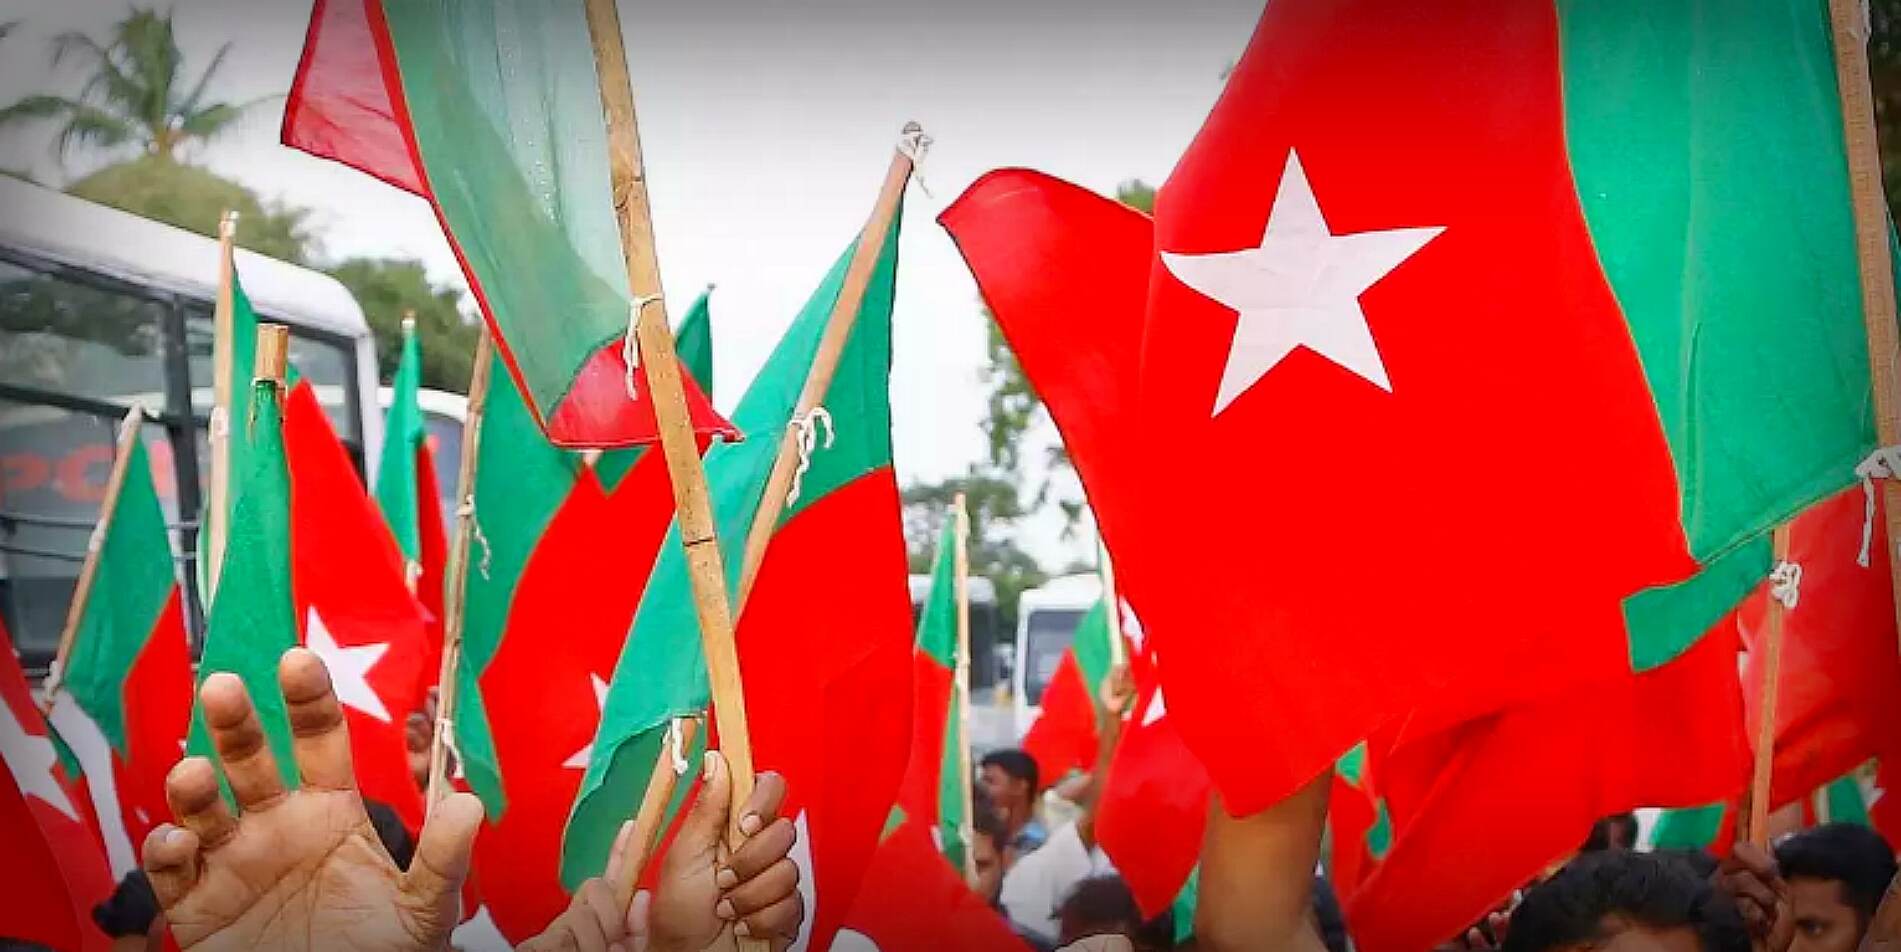 Ban on PFI is not effective on its political wing SDPI